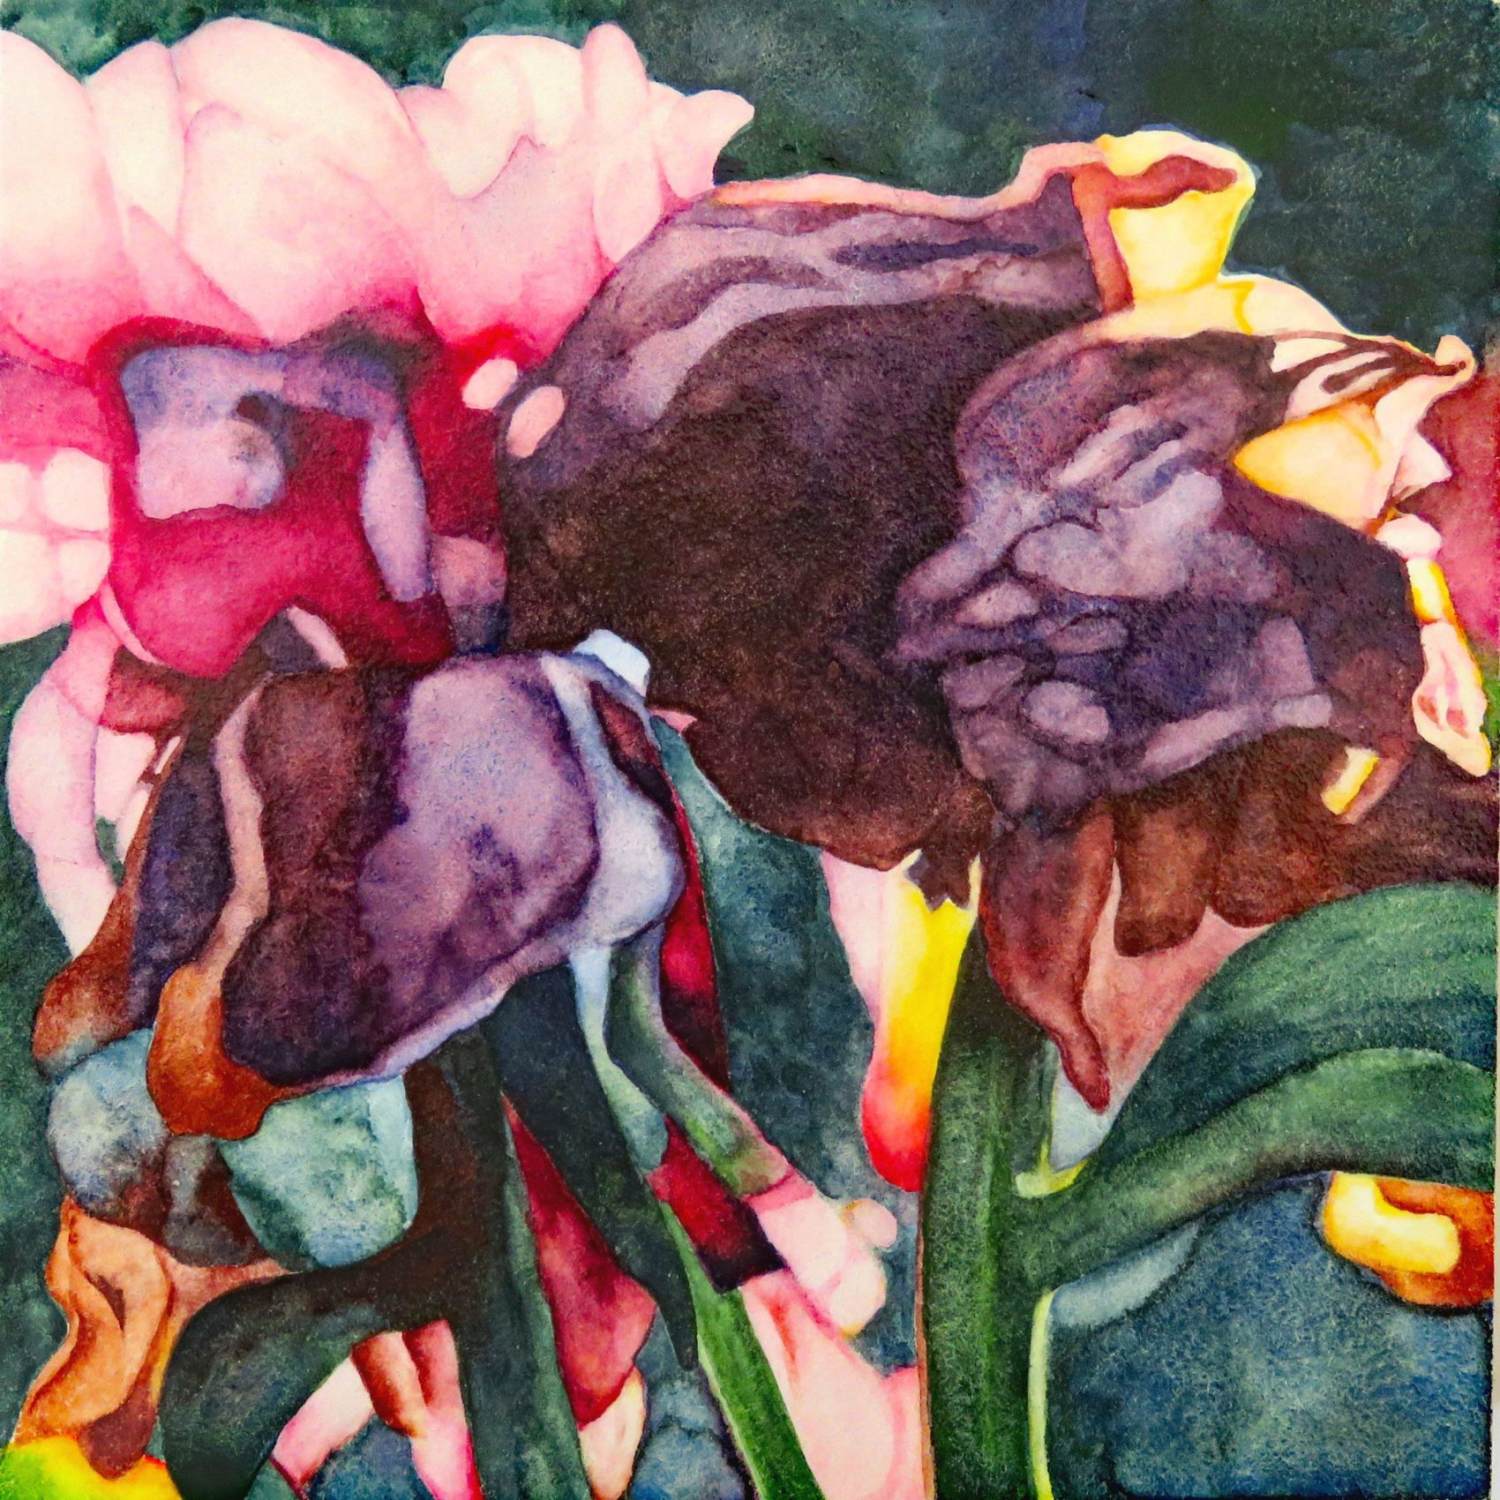 catherine-macaulay-full-life-1-peony-watercolor-flower-painting-online-gallery